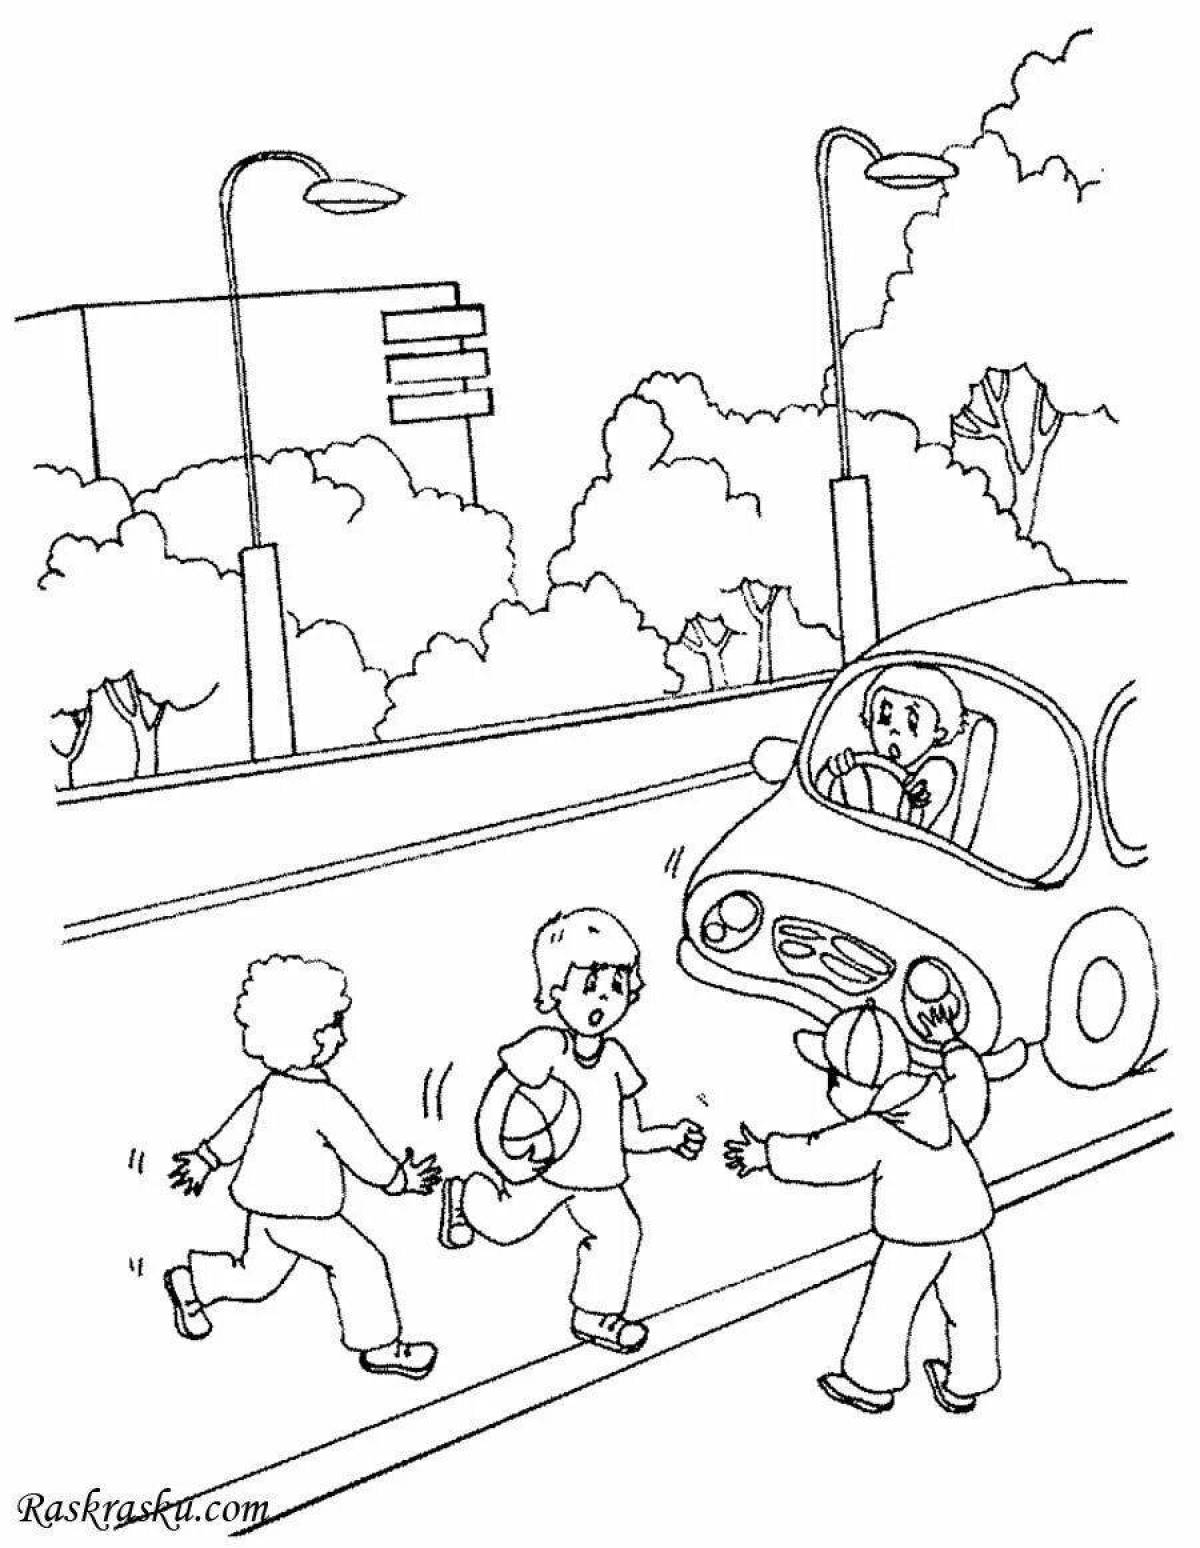 Attractive winter traffic rules coloring pages for kids